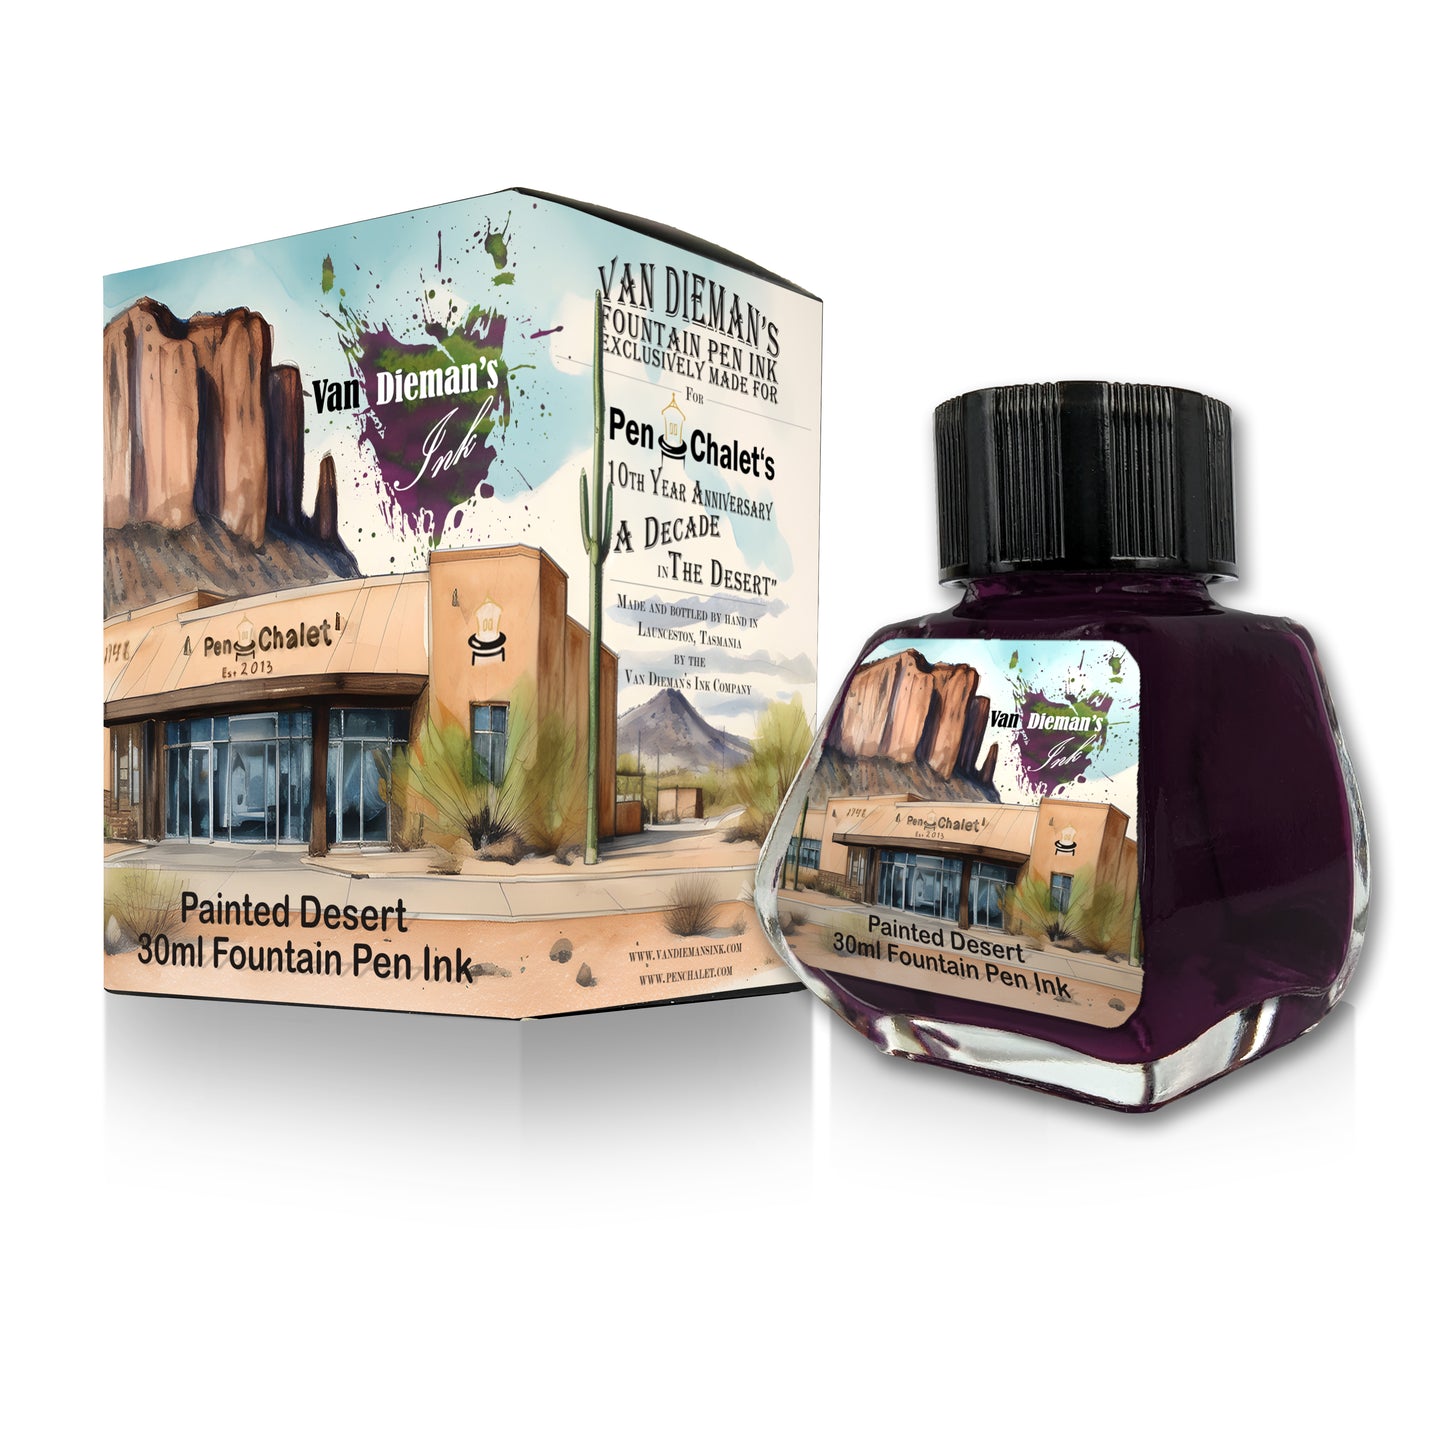 A Decade in the Desert - Painted Desert Fountain Pen Ink